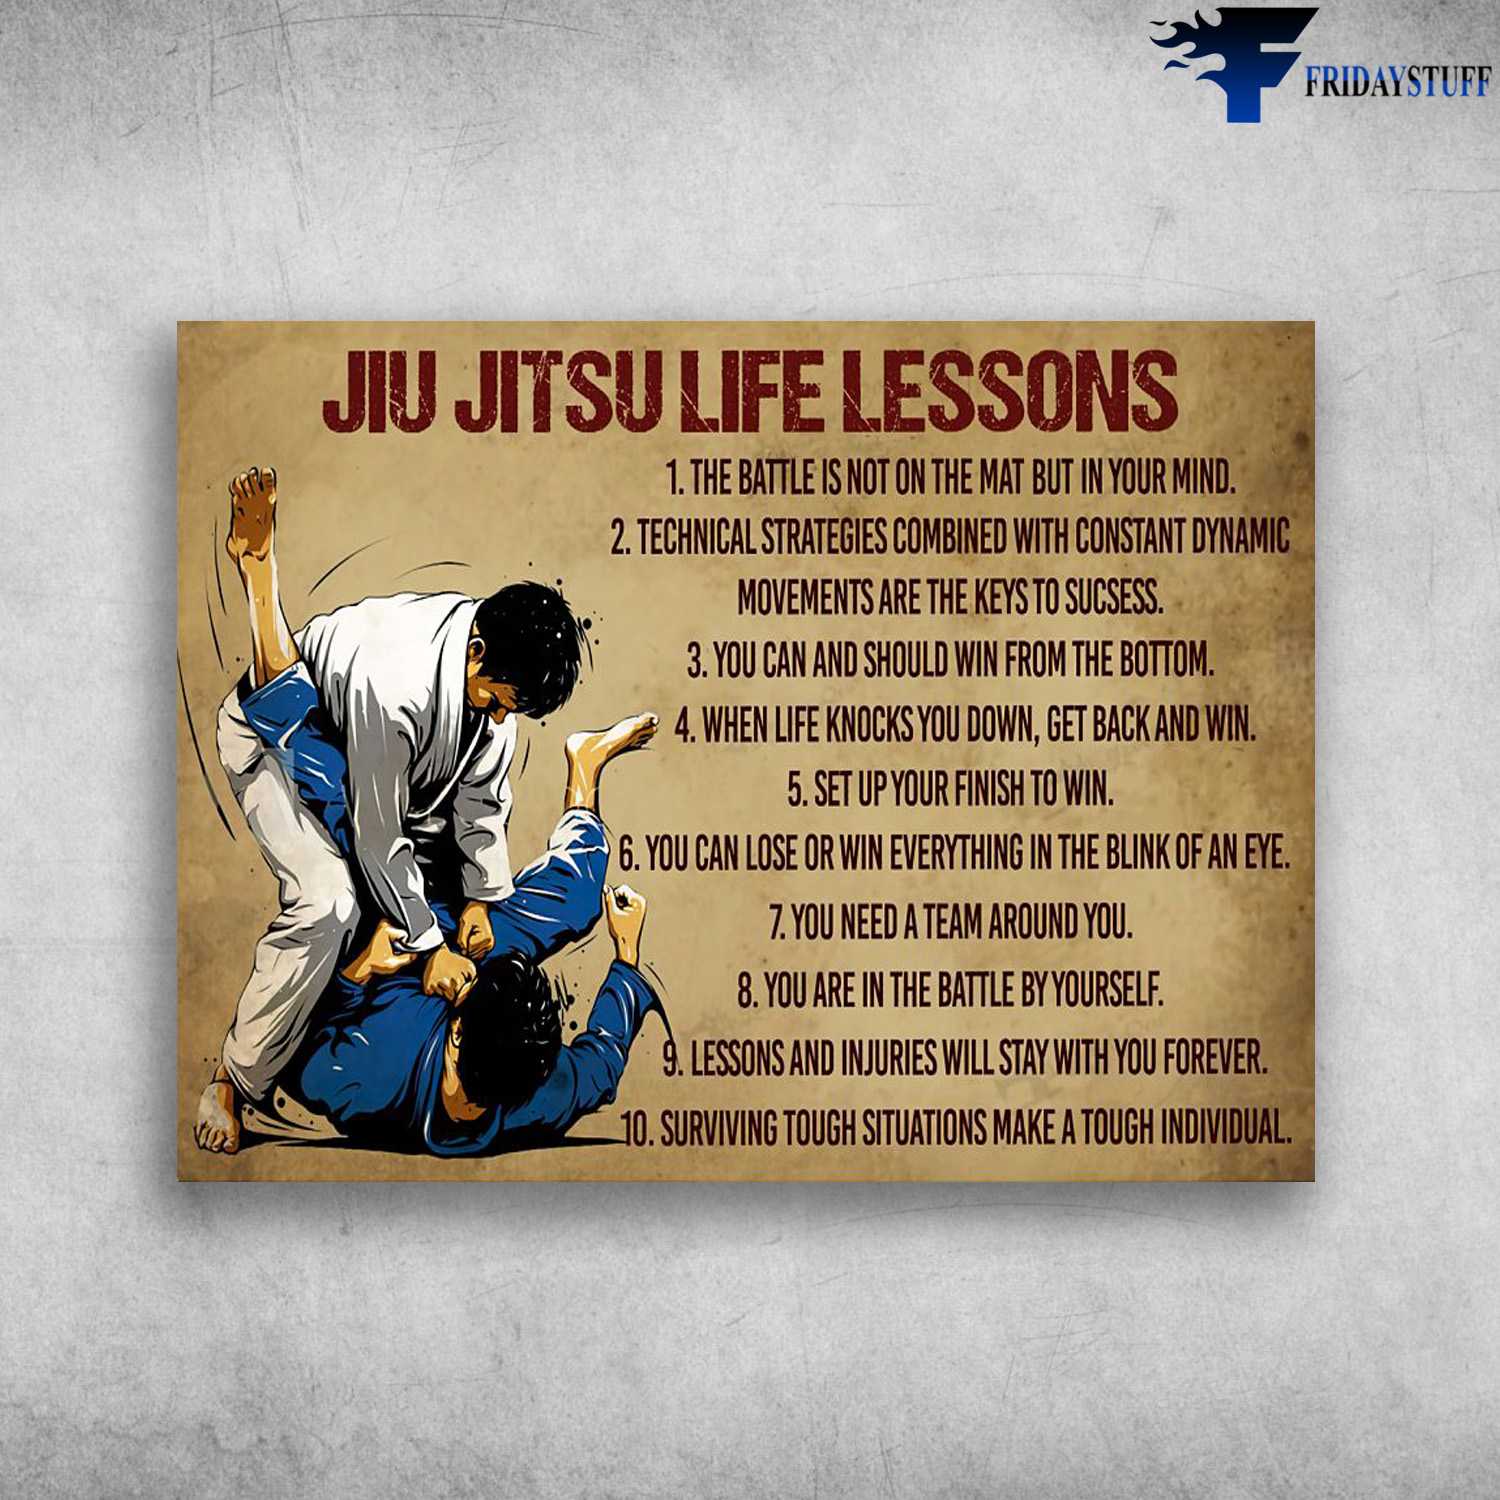 Jiu Jitsu Poster, Jiu Jitsu Life Lessons, The Battle Is Not On The Mat But In Your Mind, Technical Strategies Combined With Constant Dynamic, Movements Are The Keys To Success